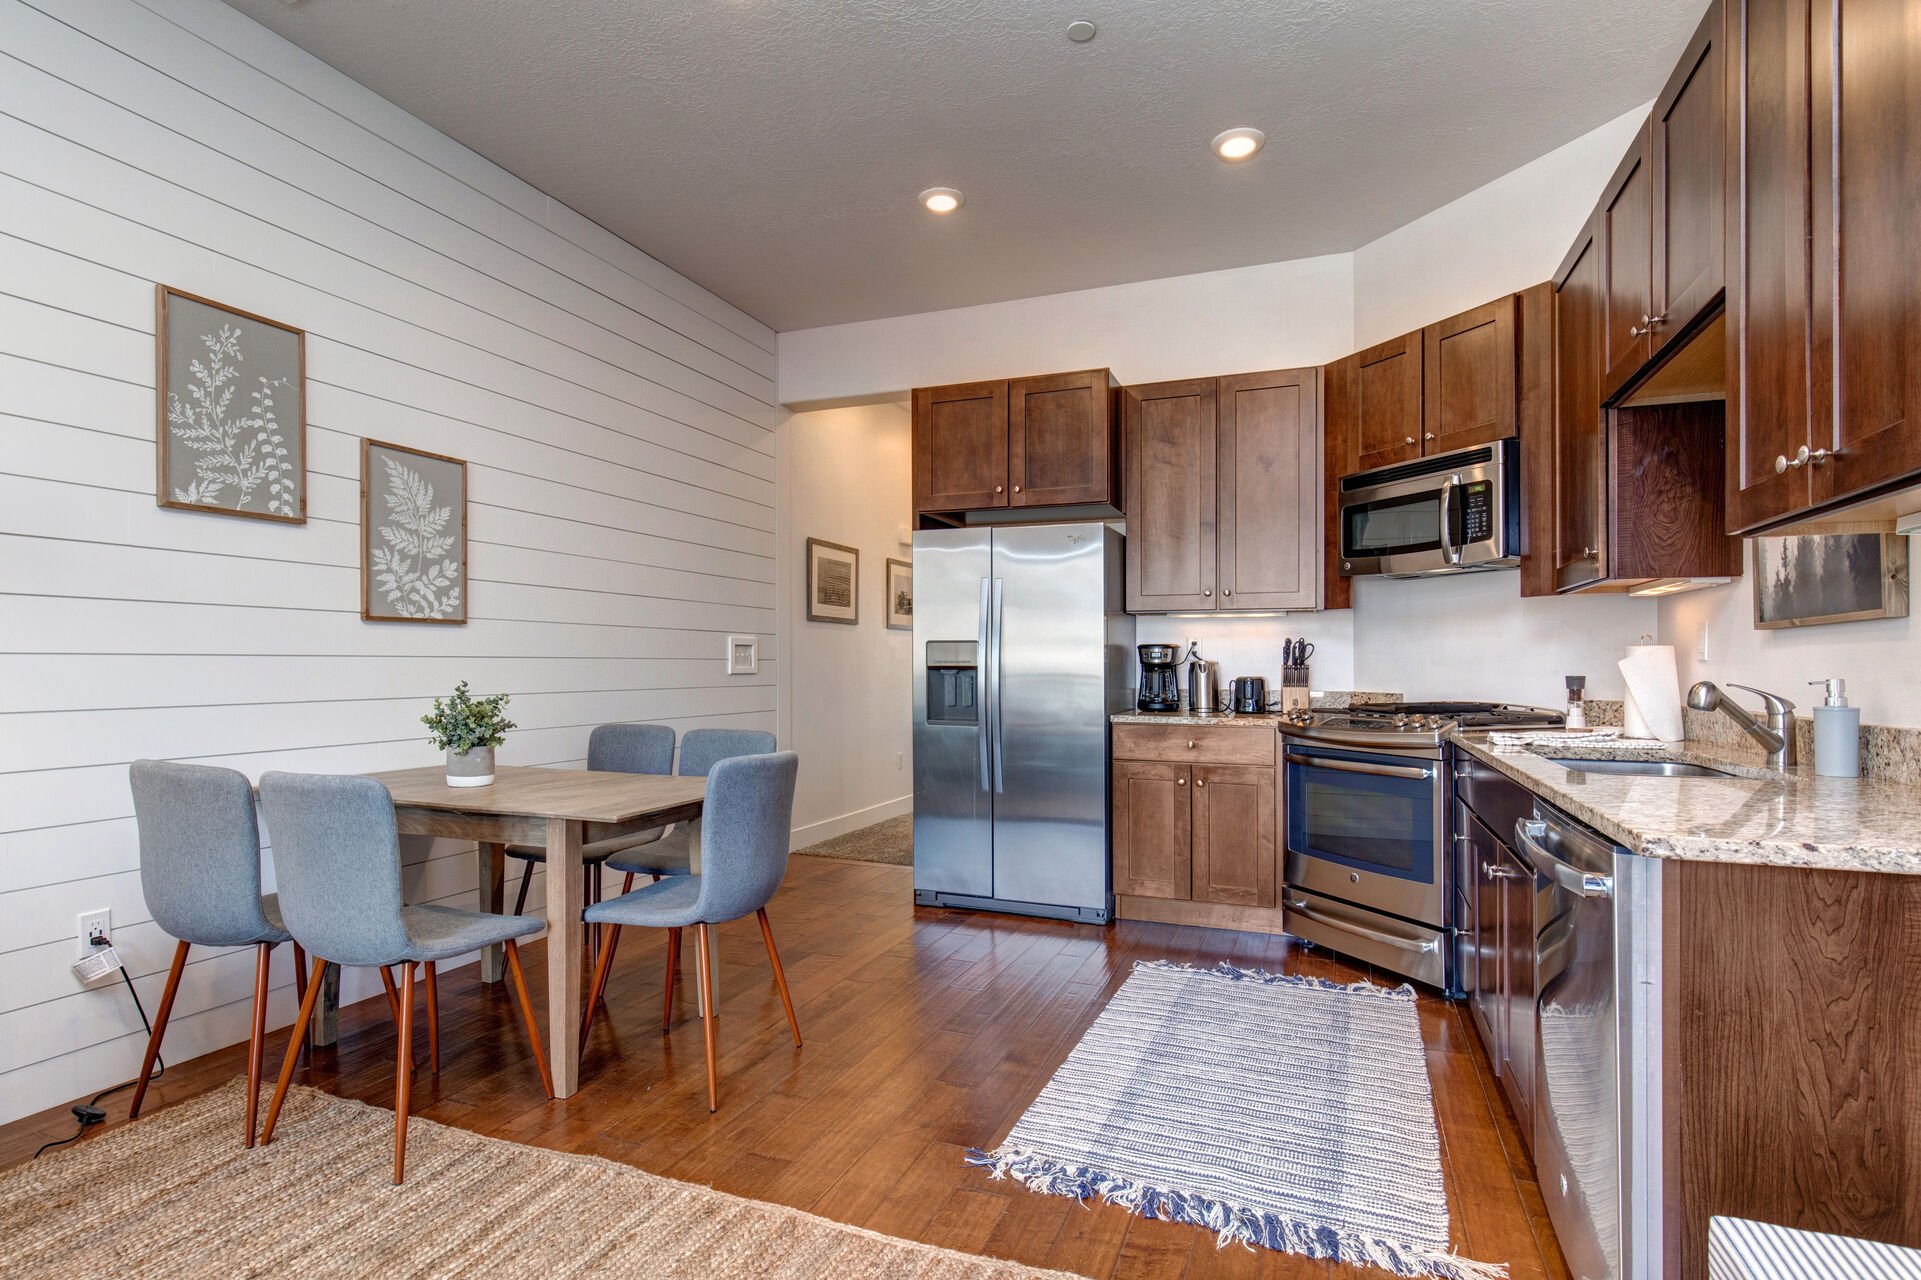 Fully Equipped Kitchen with stainless steel GE appliances, Whirlpool fridge with ice maker and water dispenser, and plenty of room to prepare any meal for those nights you just want to stay in